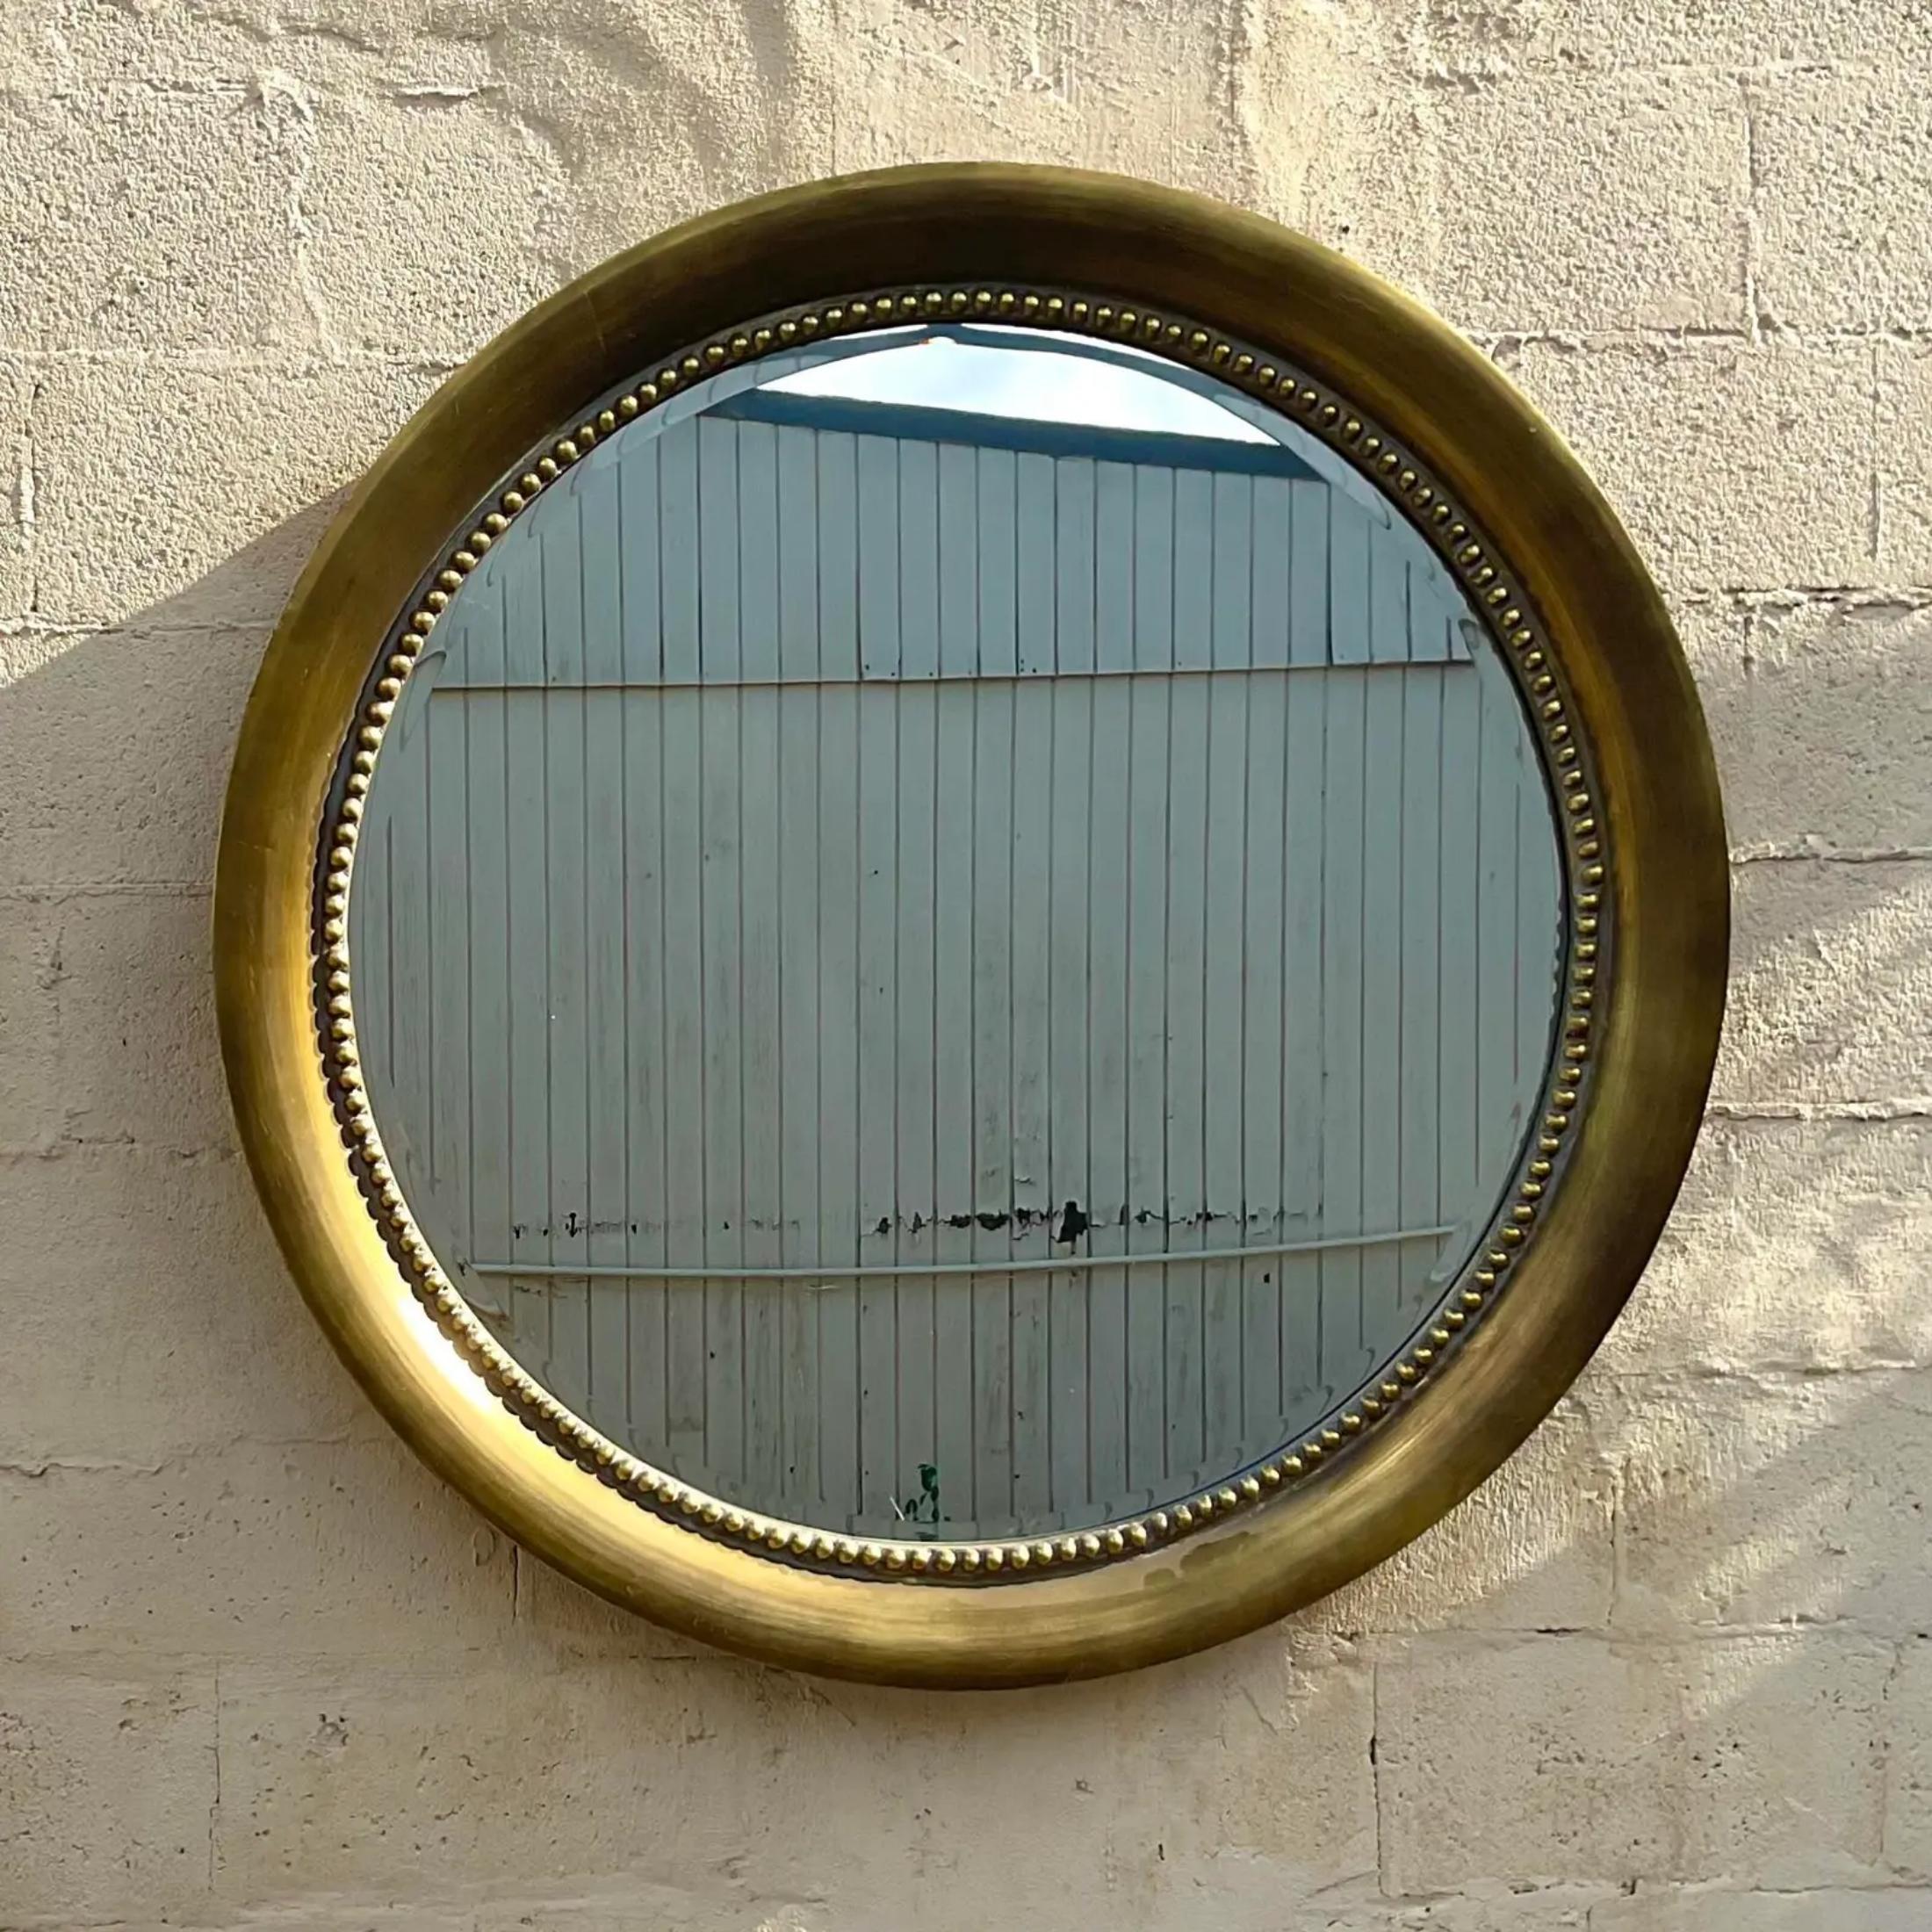 An absolutely gorgeous golden circle mirror that adds a touch of glamour to any room. Acquired at a Palm Beach estate.